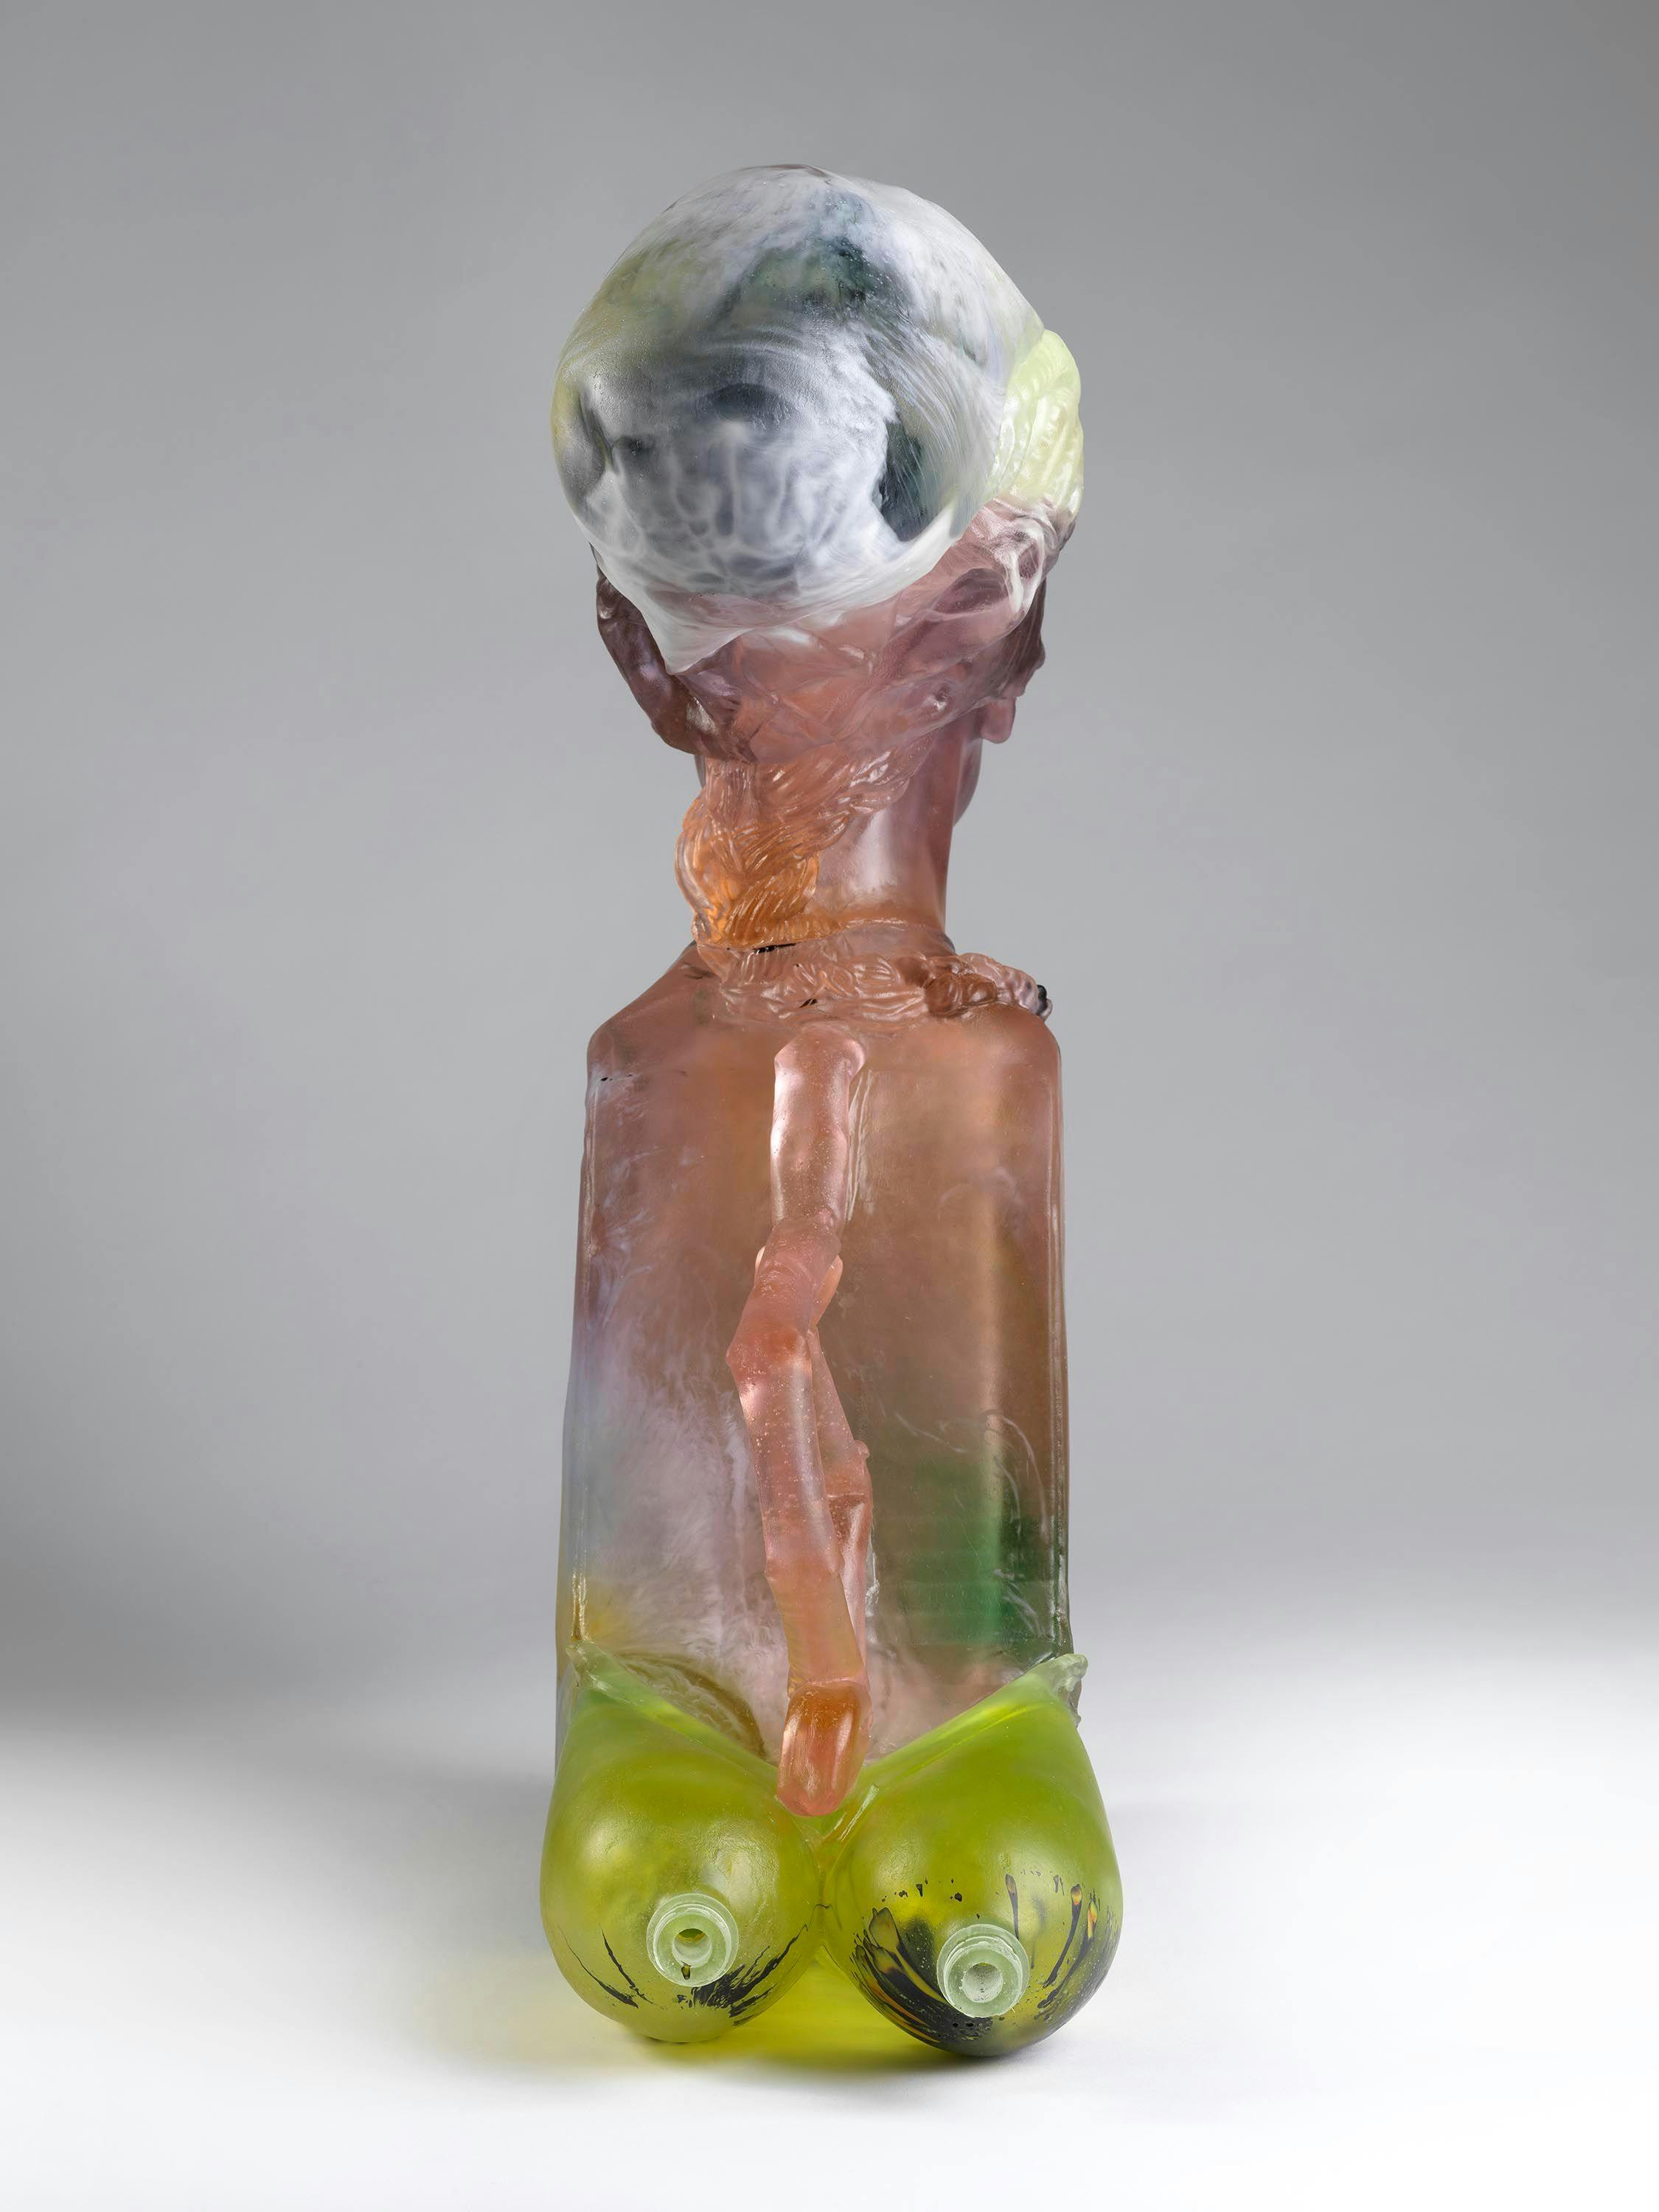 A sculpture by Andra Ursuta, titled Impersonal Growth, dated 2020.